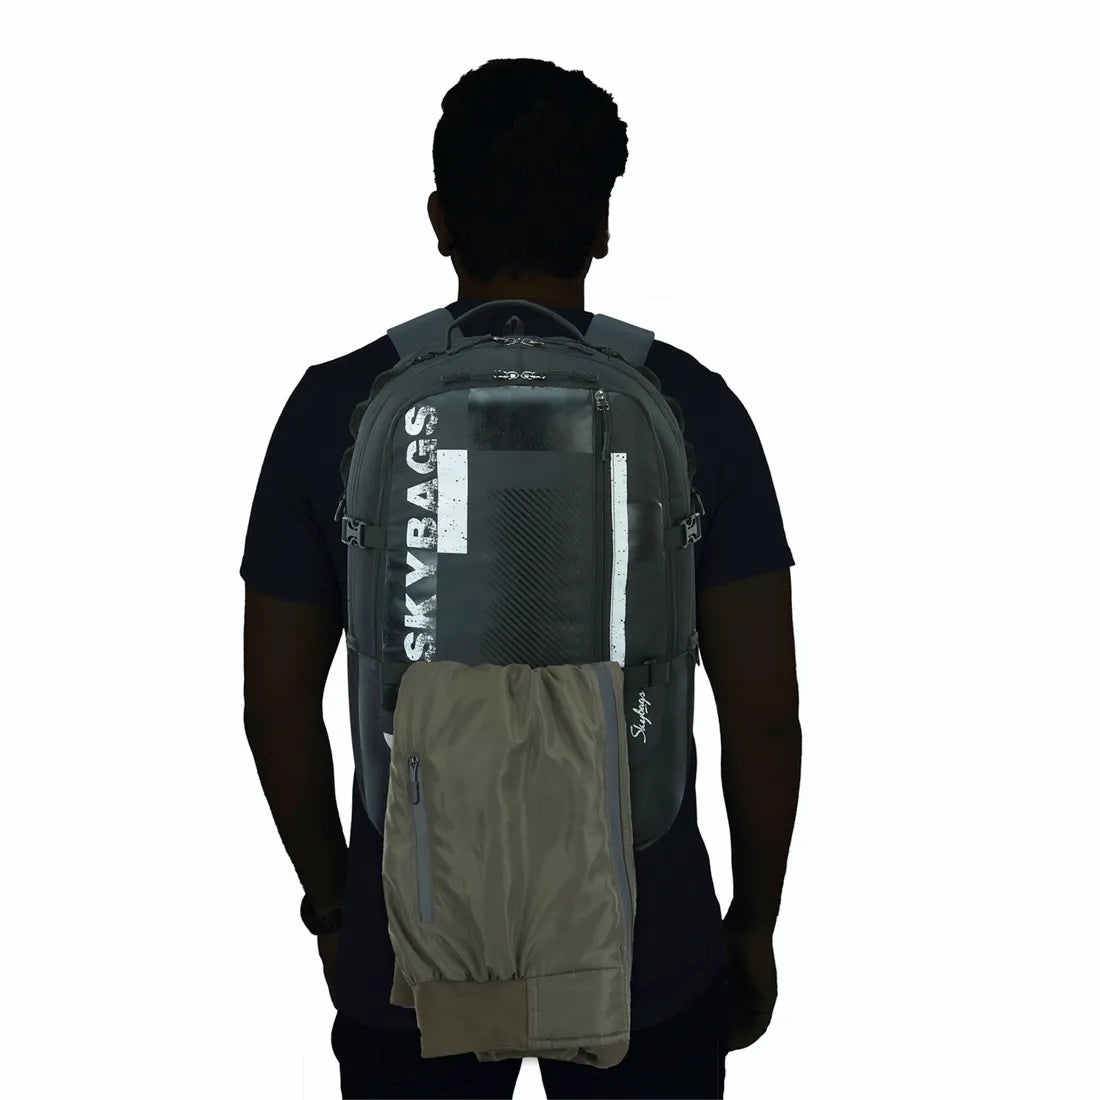 SKYBAGS CAMPUS PLUS XL "02 LAPTOP BACKPACK"